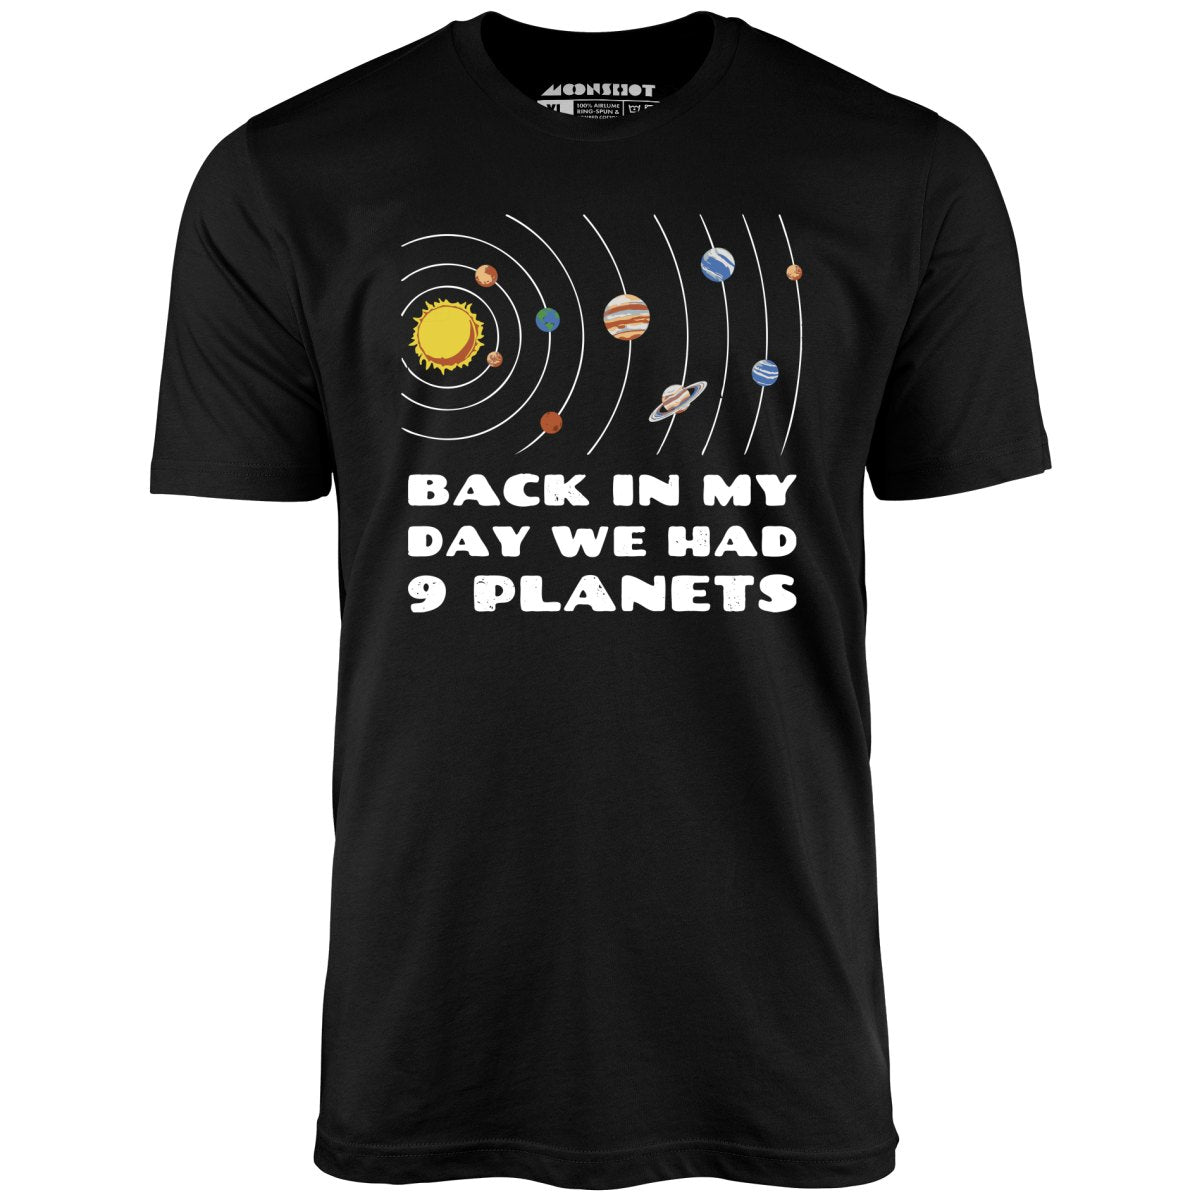 Back in My Day We Had 9 Planets - Unisex T-Shirt